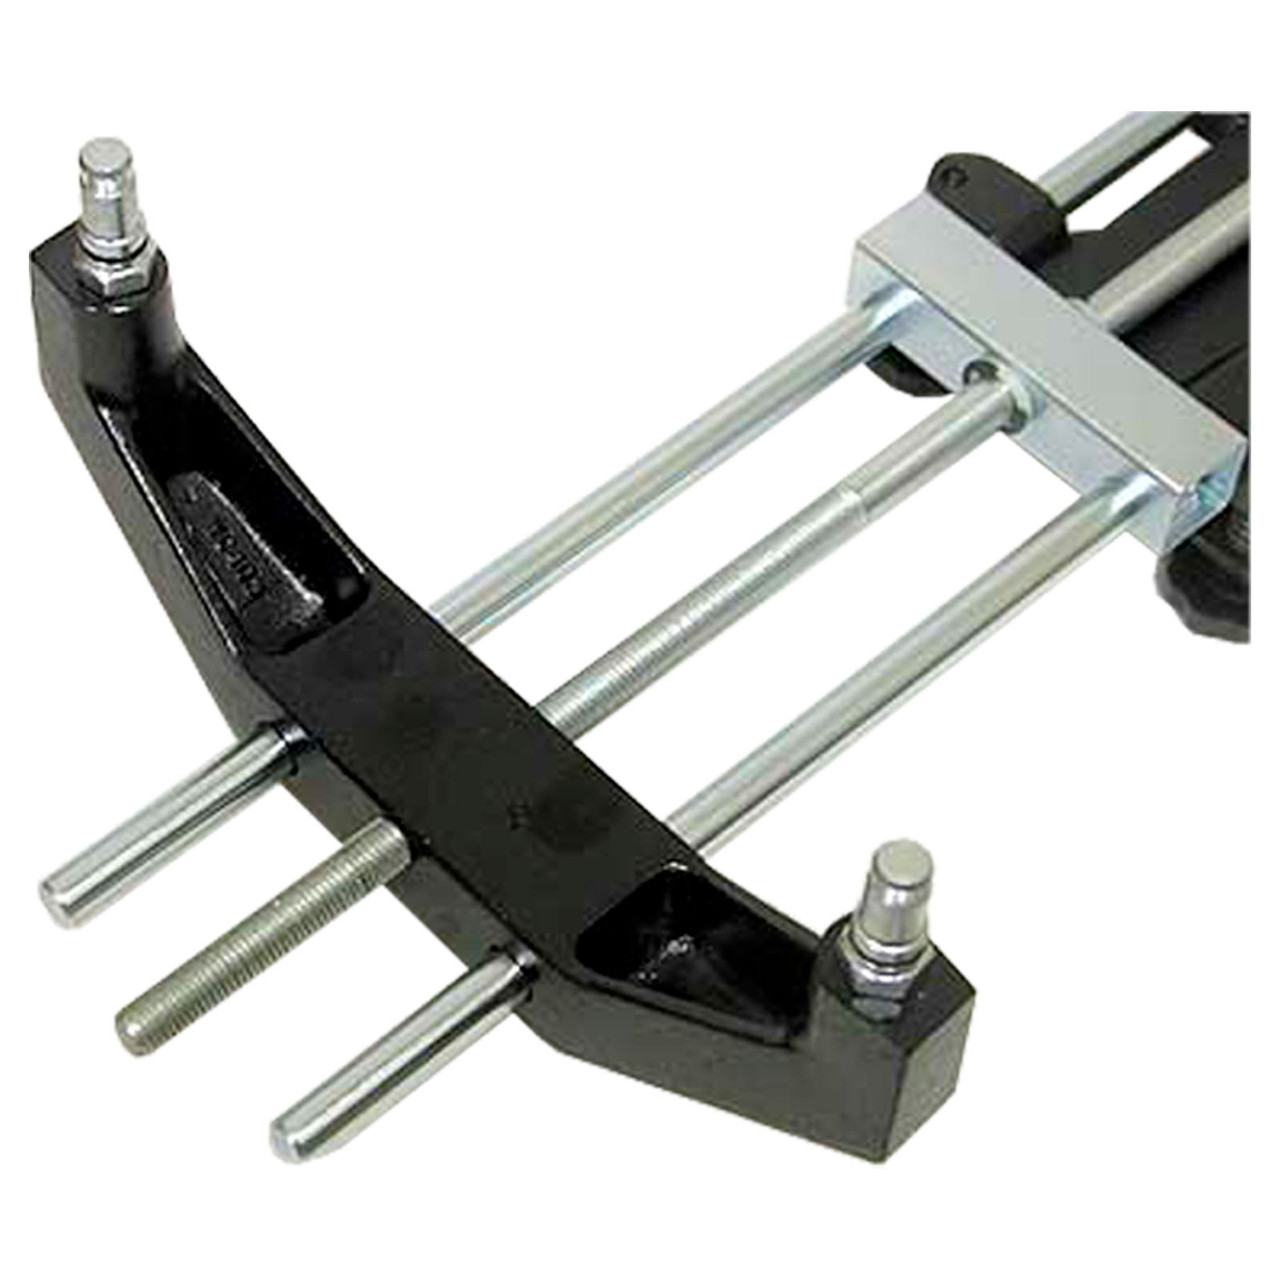 8170 - Truck Large Rim Universal Alignment 16" to 26" Wheel Clamp Adapter - Close-Up View 2 by MT-RSR | McBay Performance